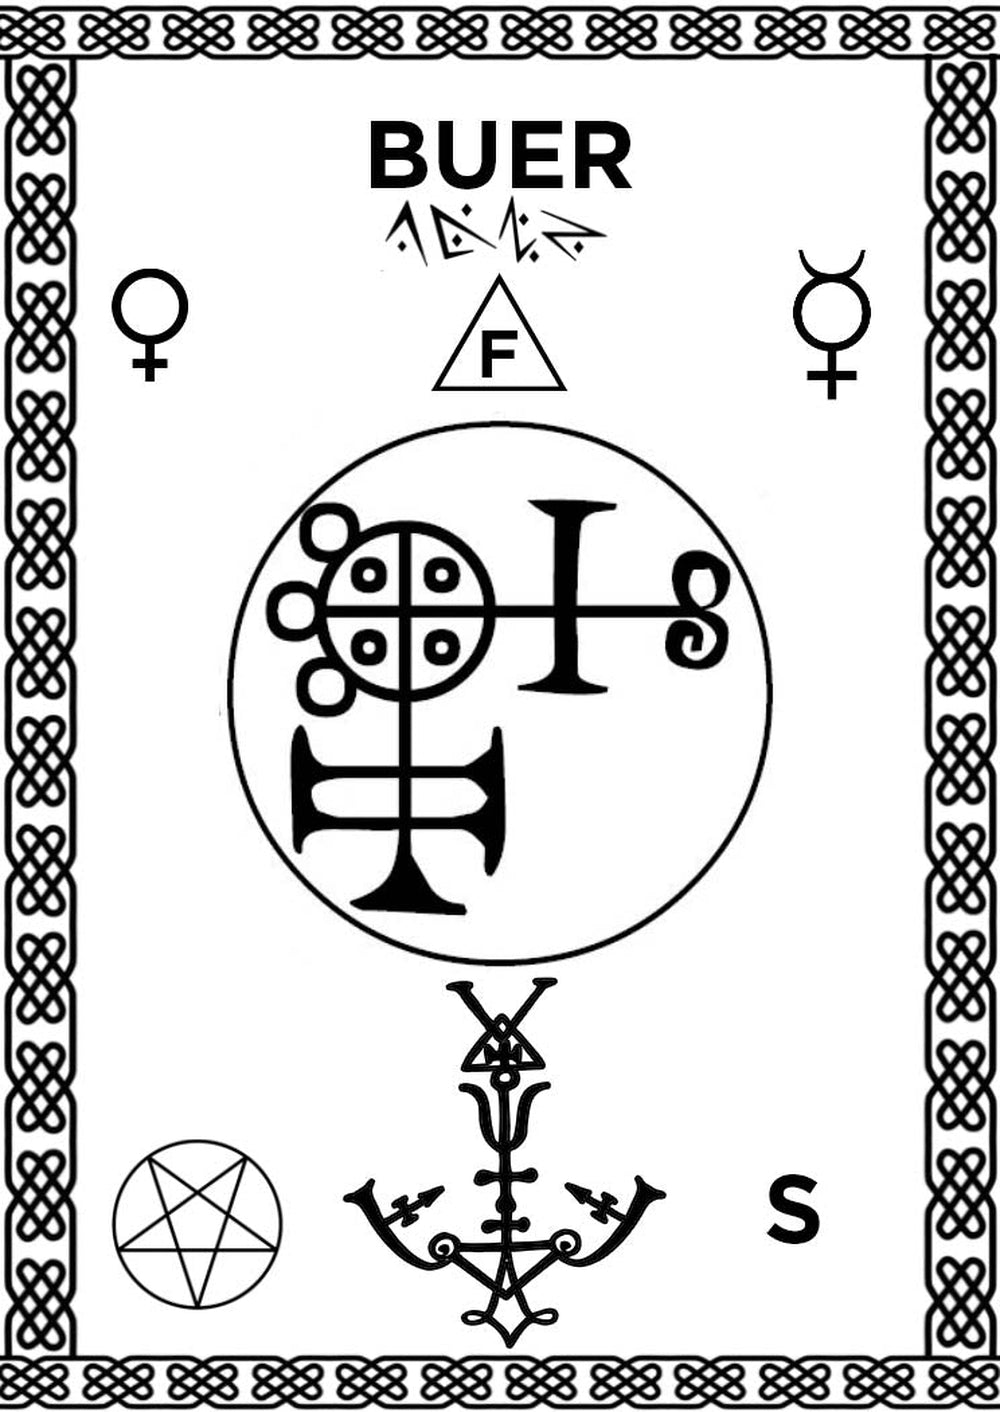 Invocation-Alignment-Pad-with-the-Sigil-of-Buer-for-home-altare-Witchcraft-2